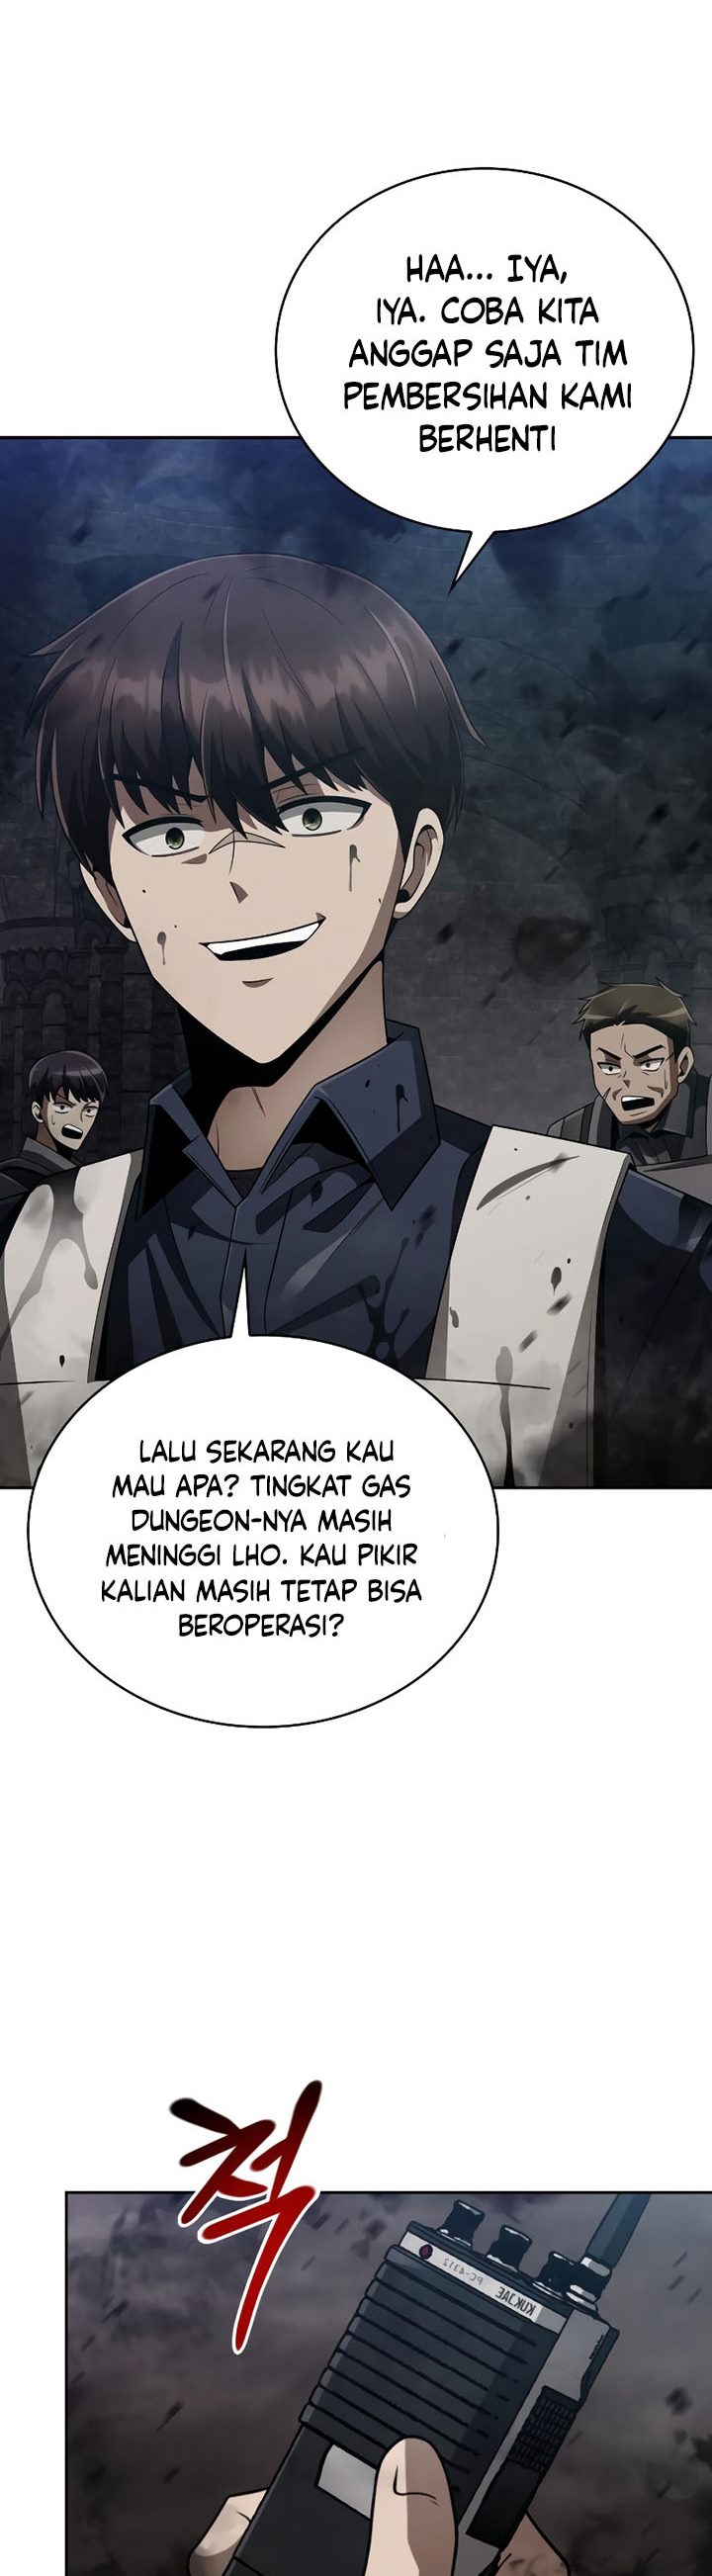 Dilarang COPAS - situs resmi www.mangacanblog.com - Komik clever cleaning life of the returned genius hunter 016 - chapter 16 17 Indonesia clever cleaning life of the returned genius hunter 016 - chapter 16 Terbaru 29|Baca Manga Komik Indonesia|Mangacan